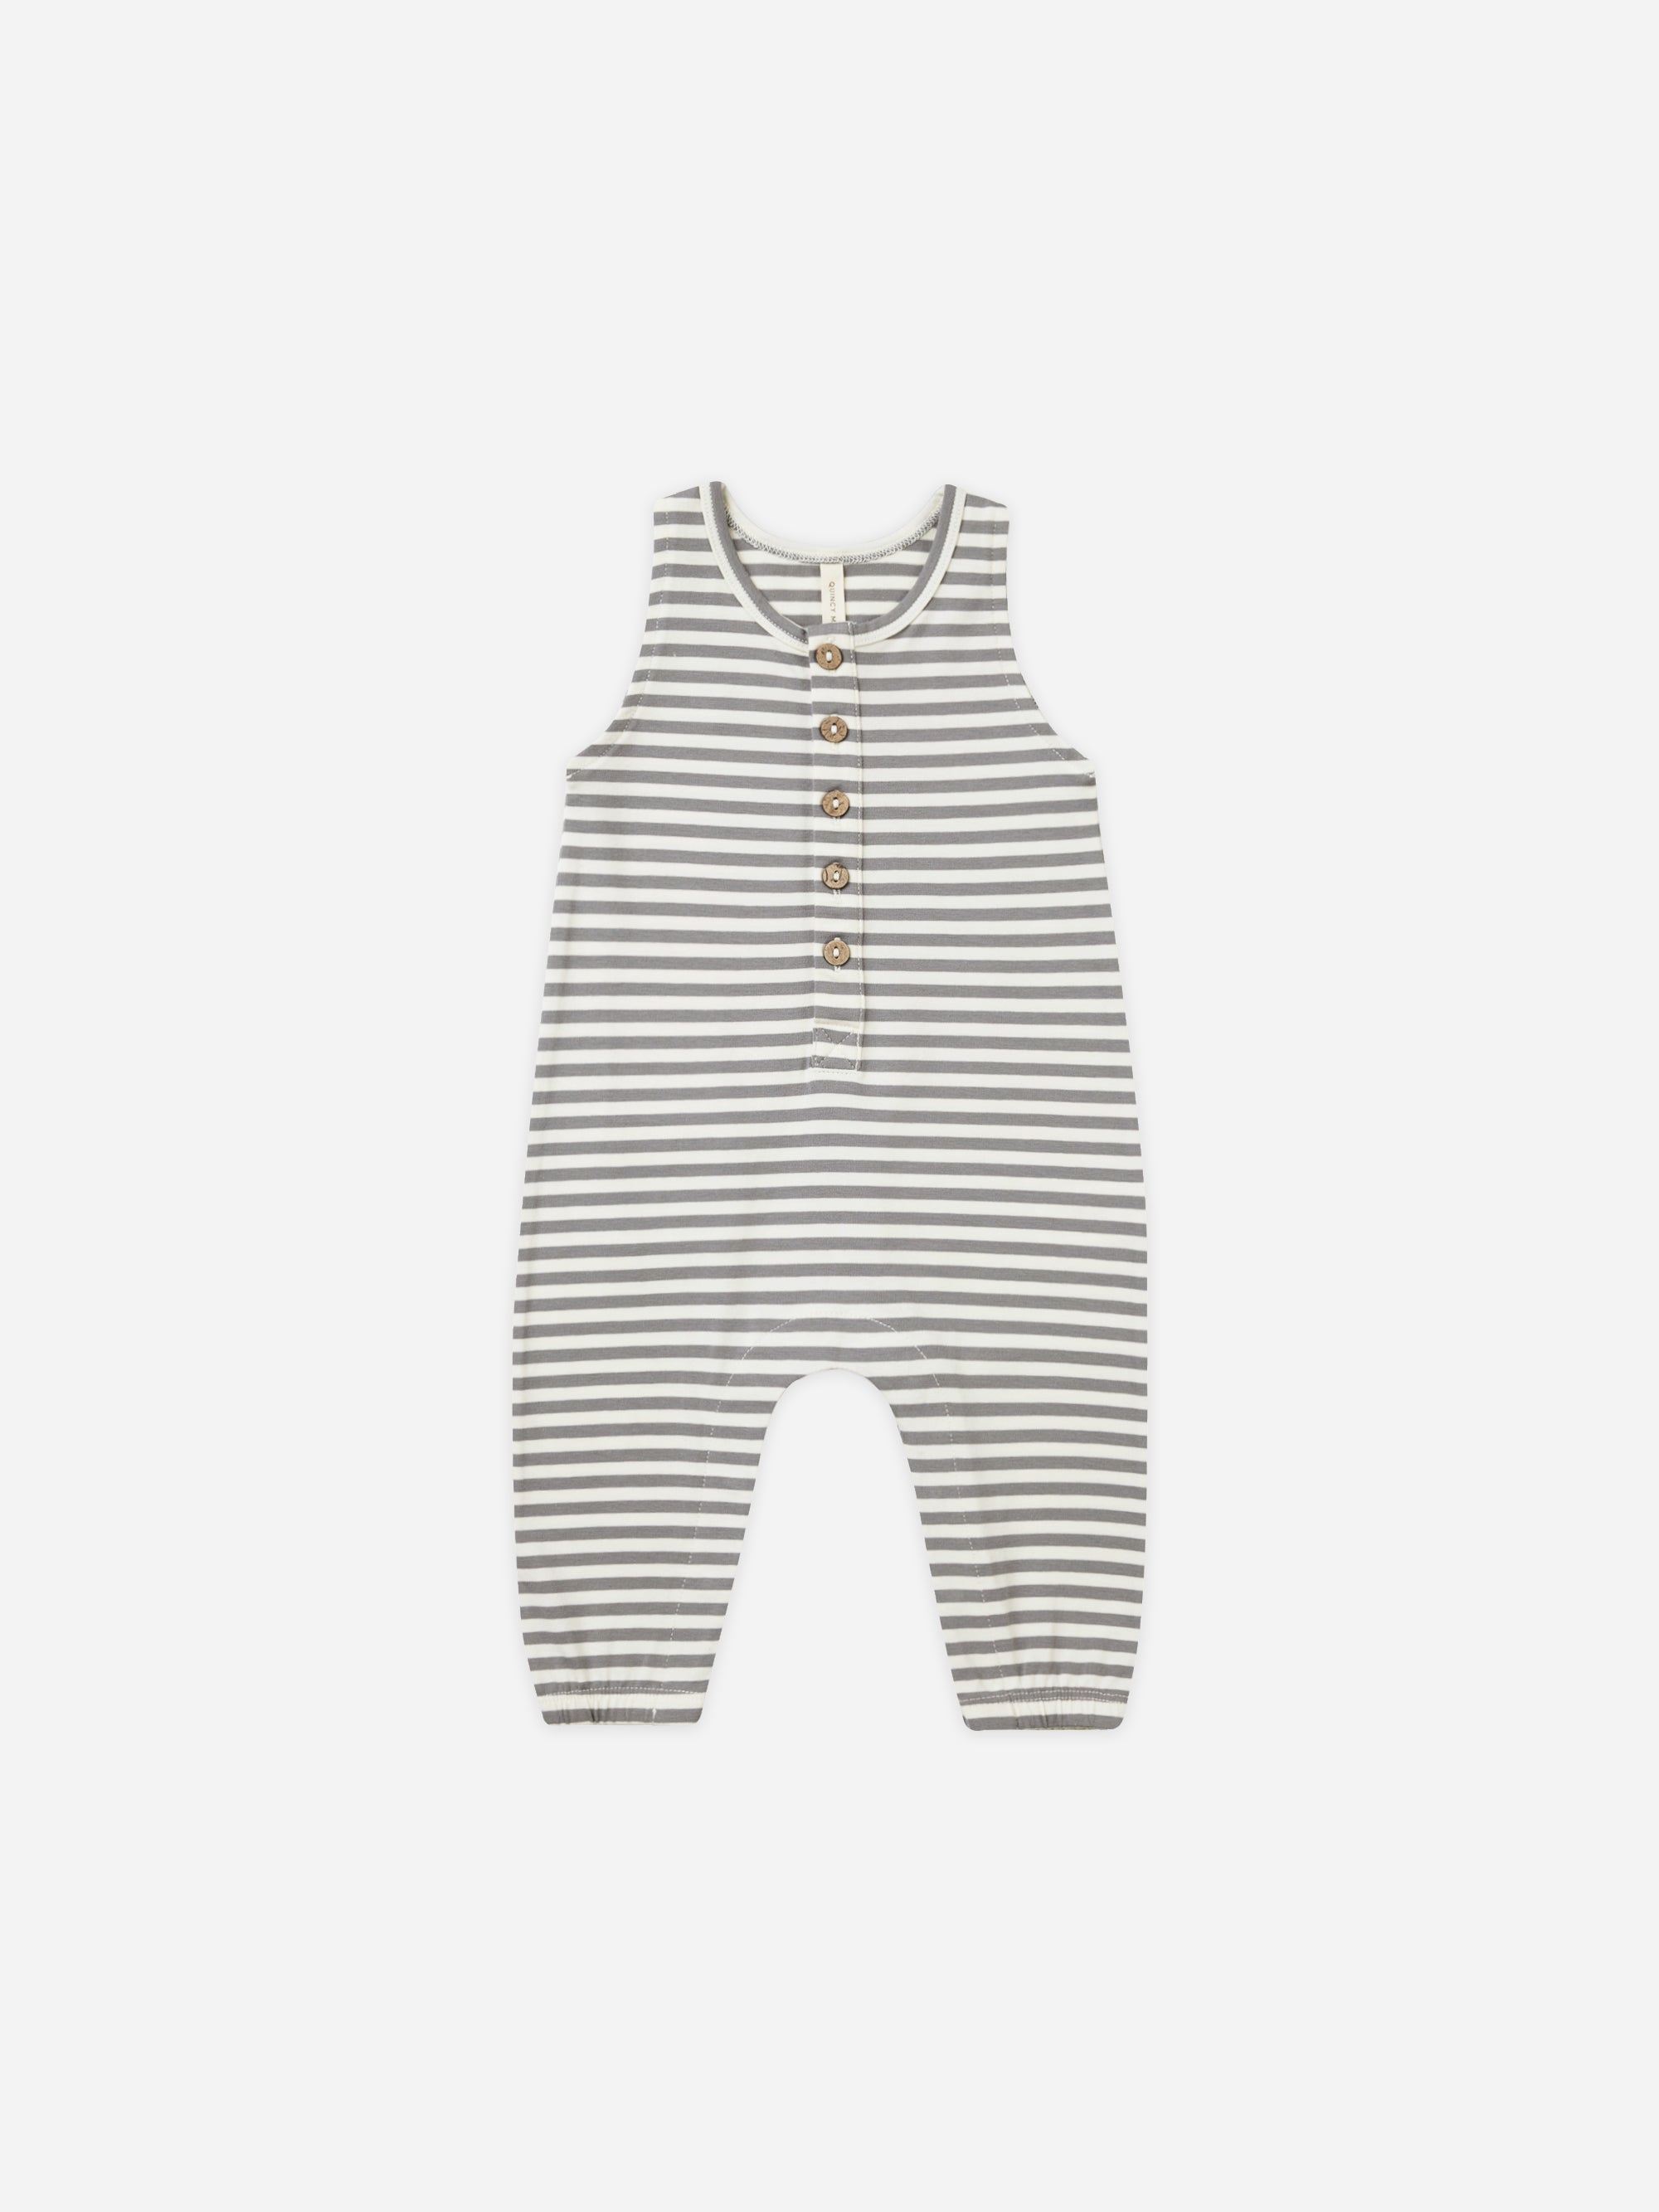 Sleeveless Jumpsuit || Lagoon Stripe - Rylee + Cru | Kids Clothes | Trendy Baby Clothes | Modern Infant Outfits |